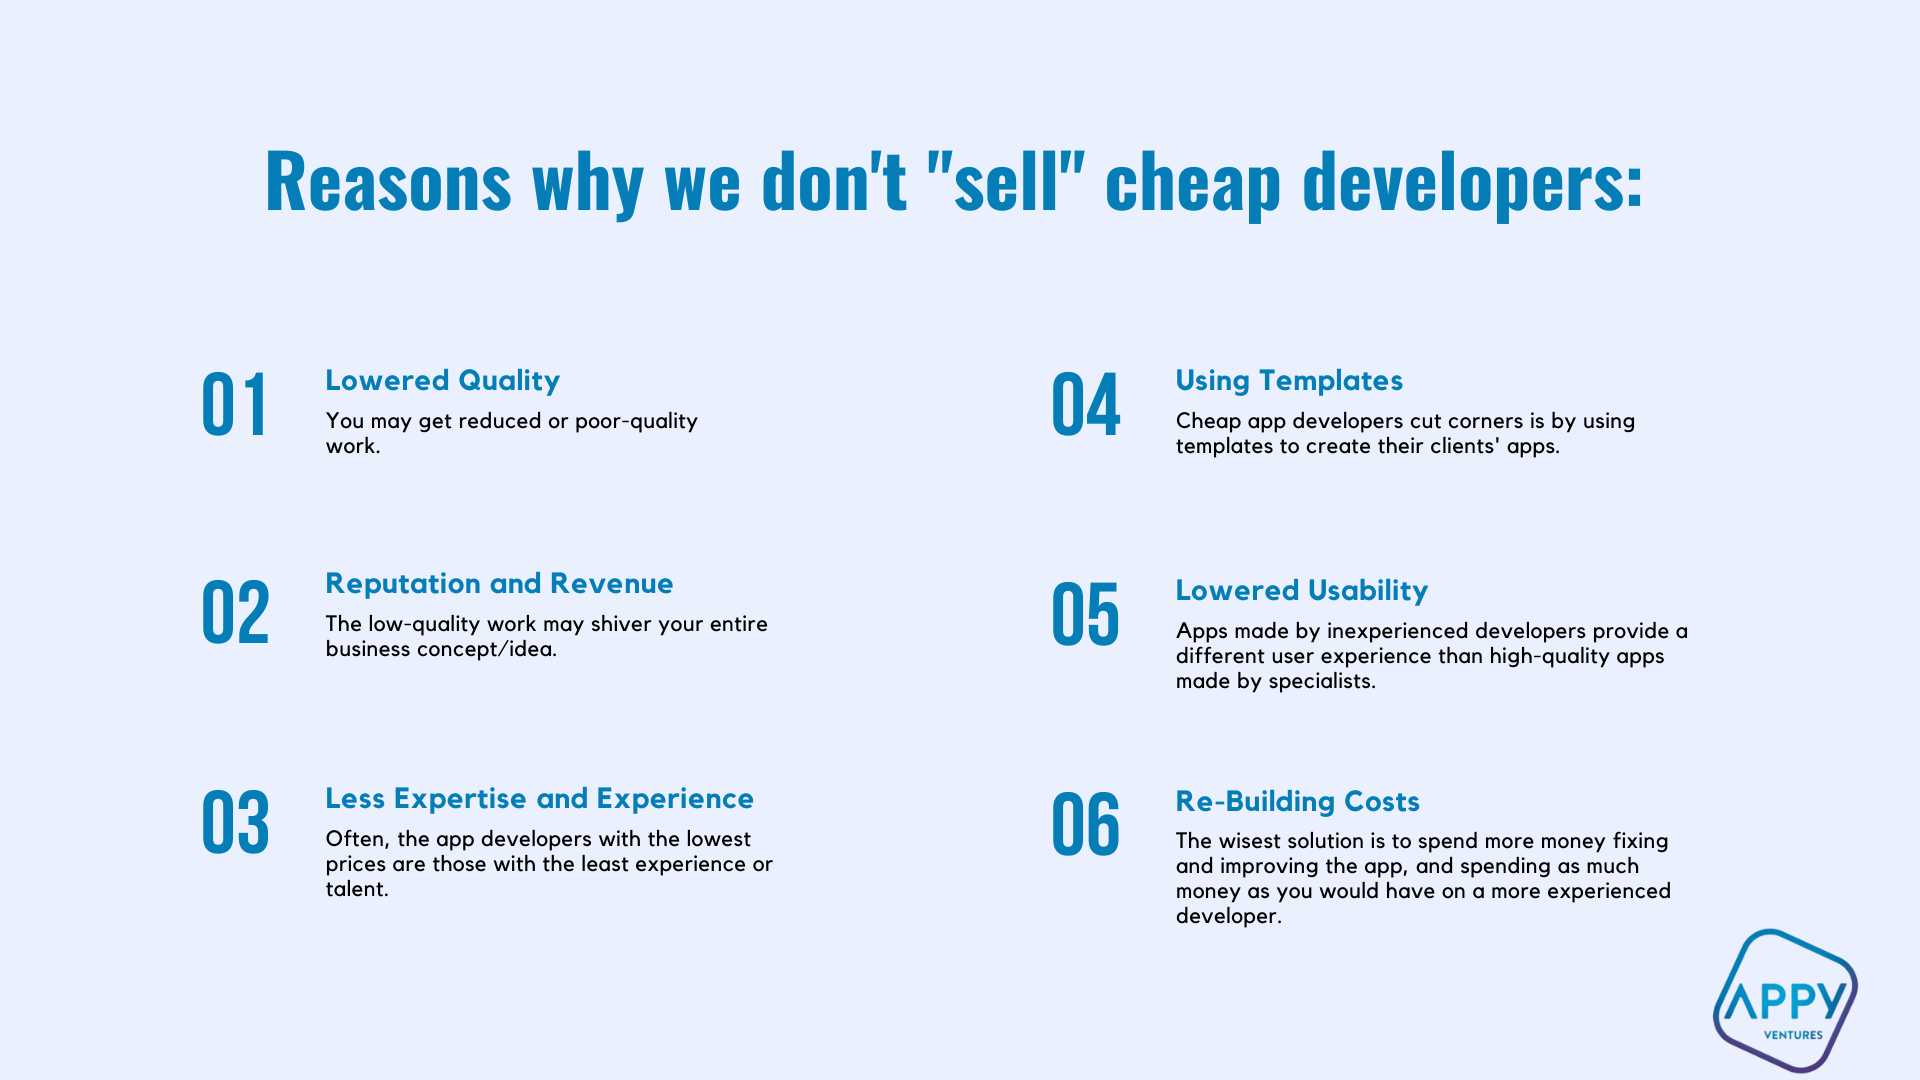 Six reasons why Appy Ventures don't sell cheap developers to its clients.